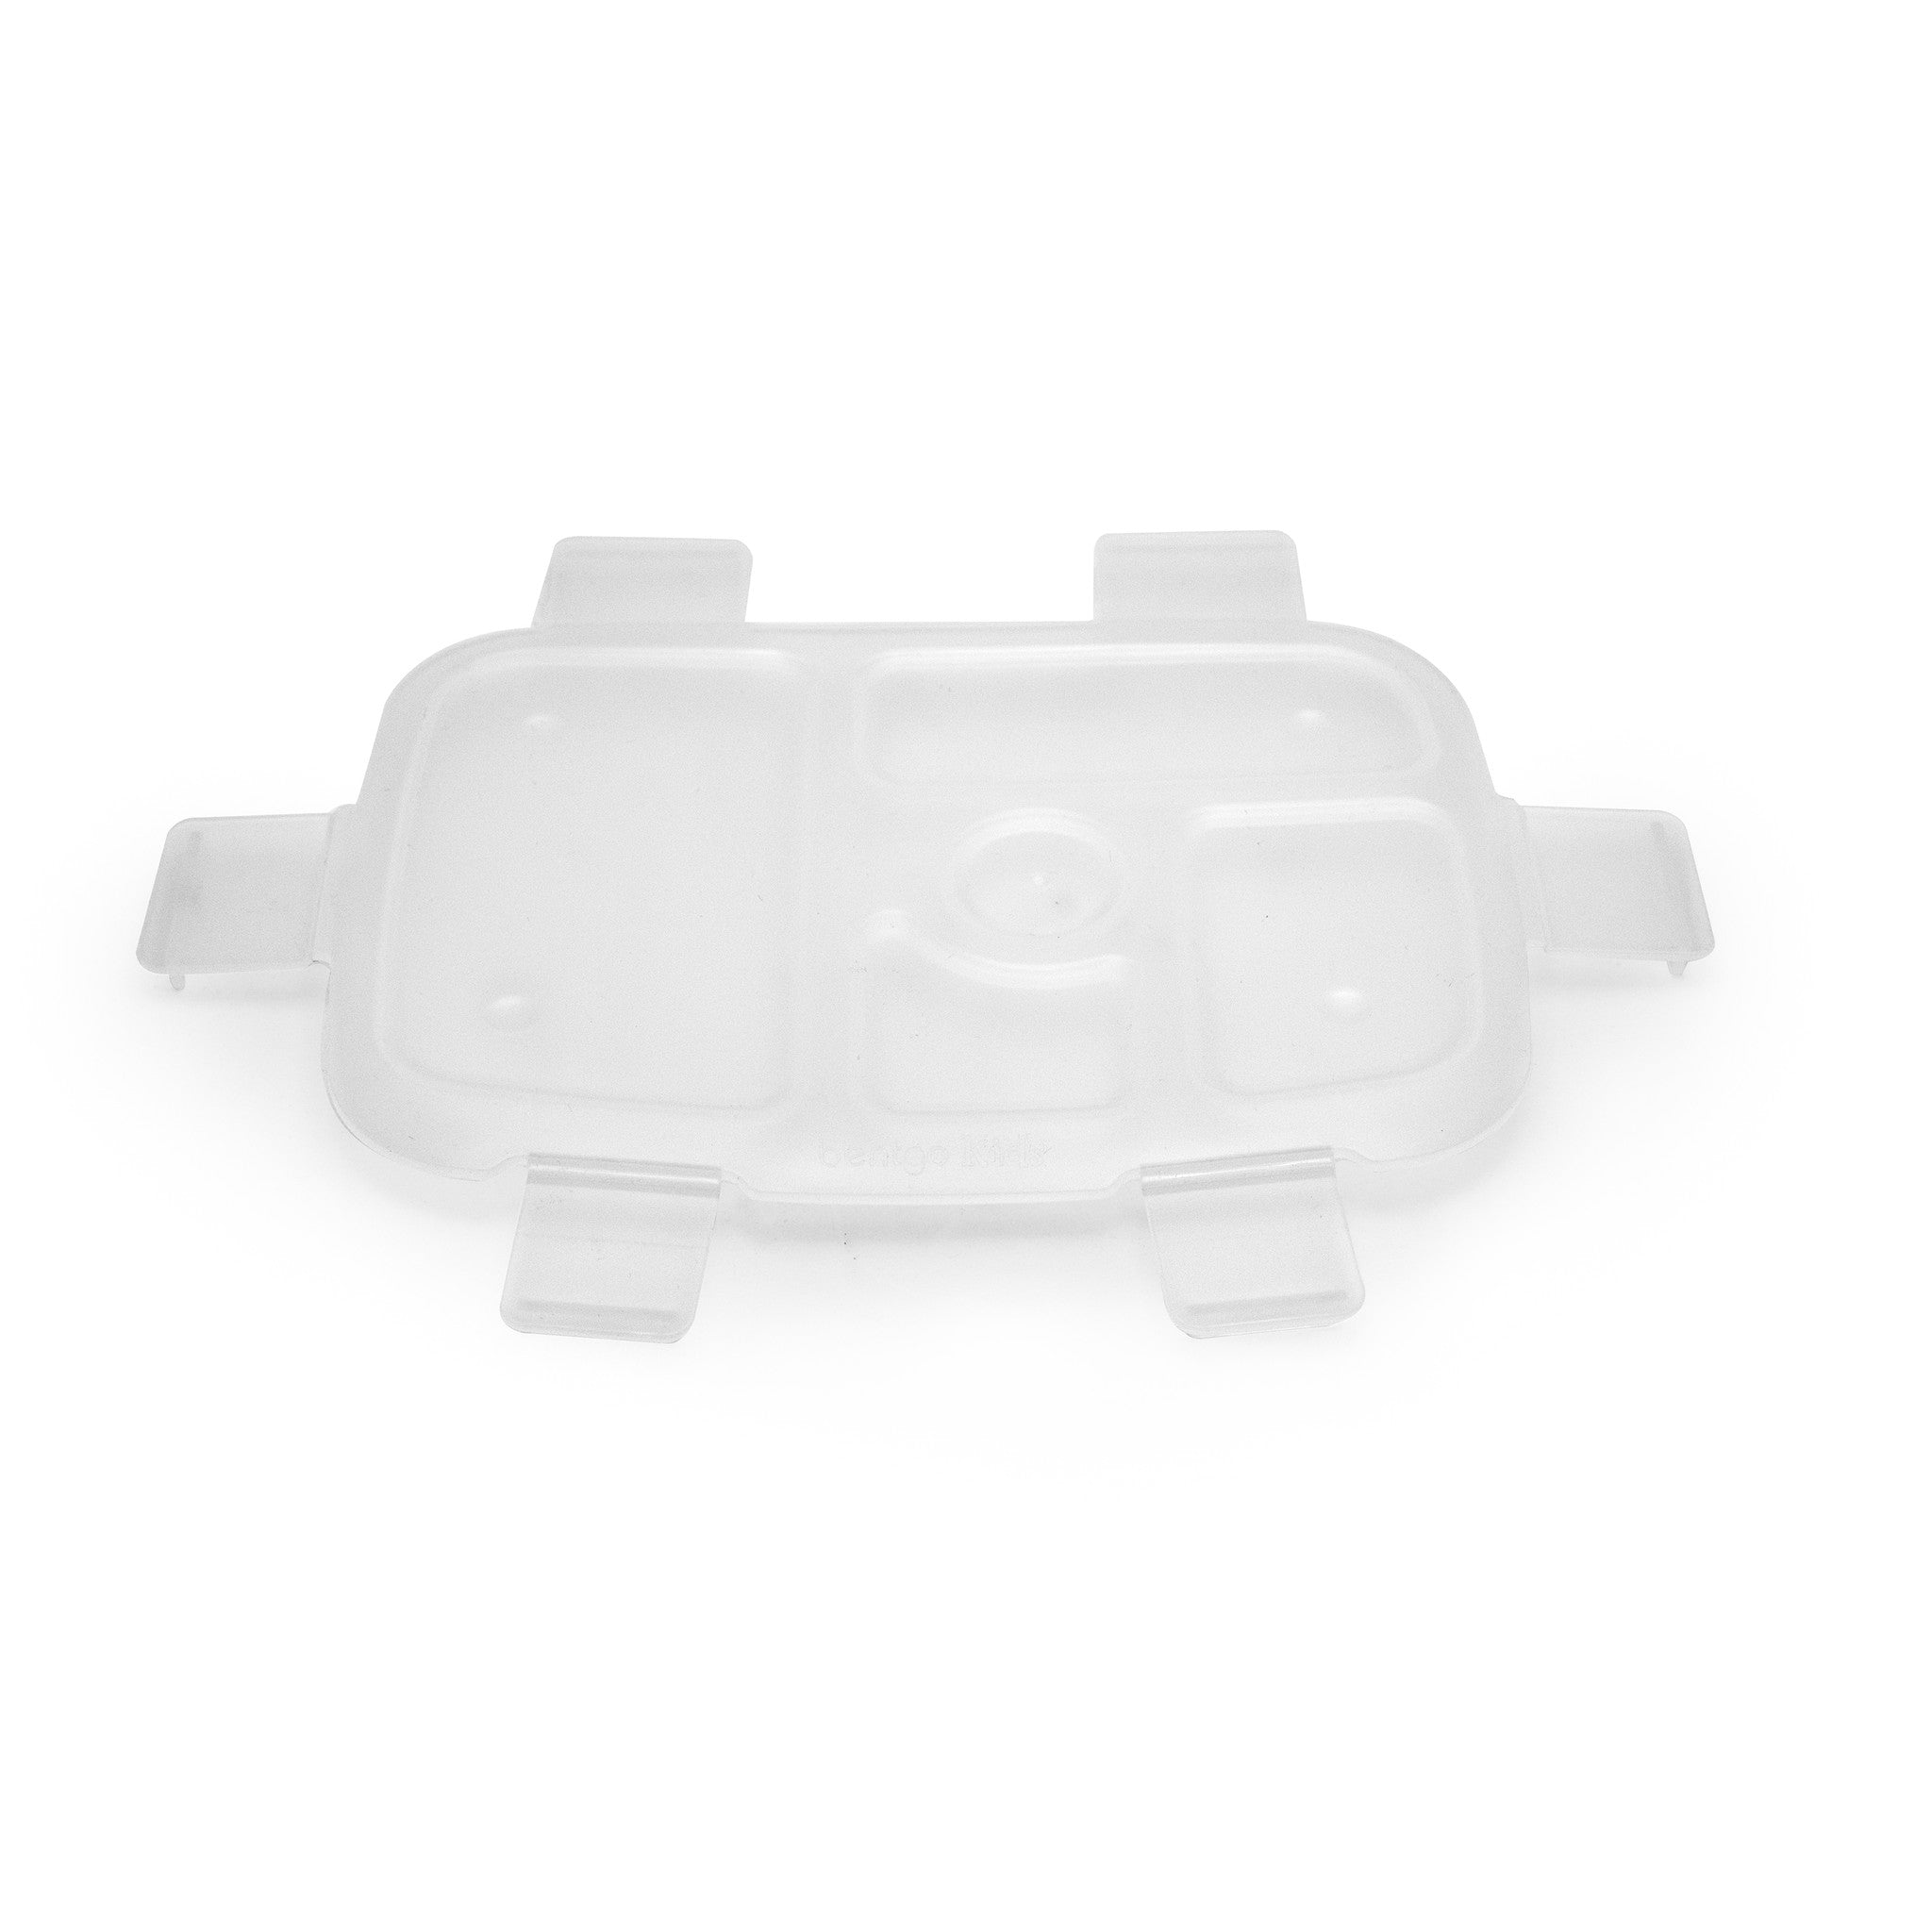 Meal Tray, Transparent, Reusable Plastic